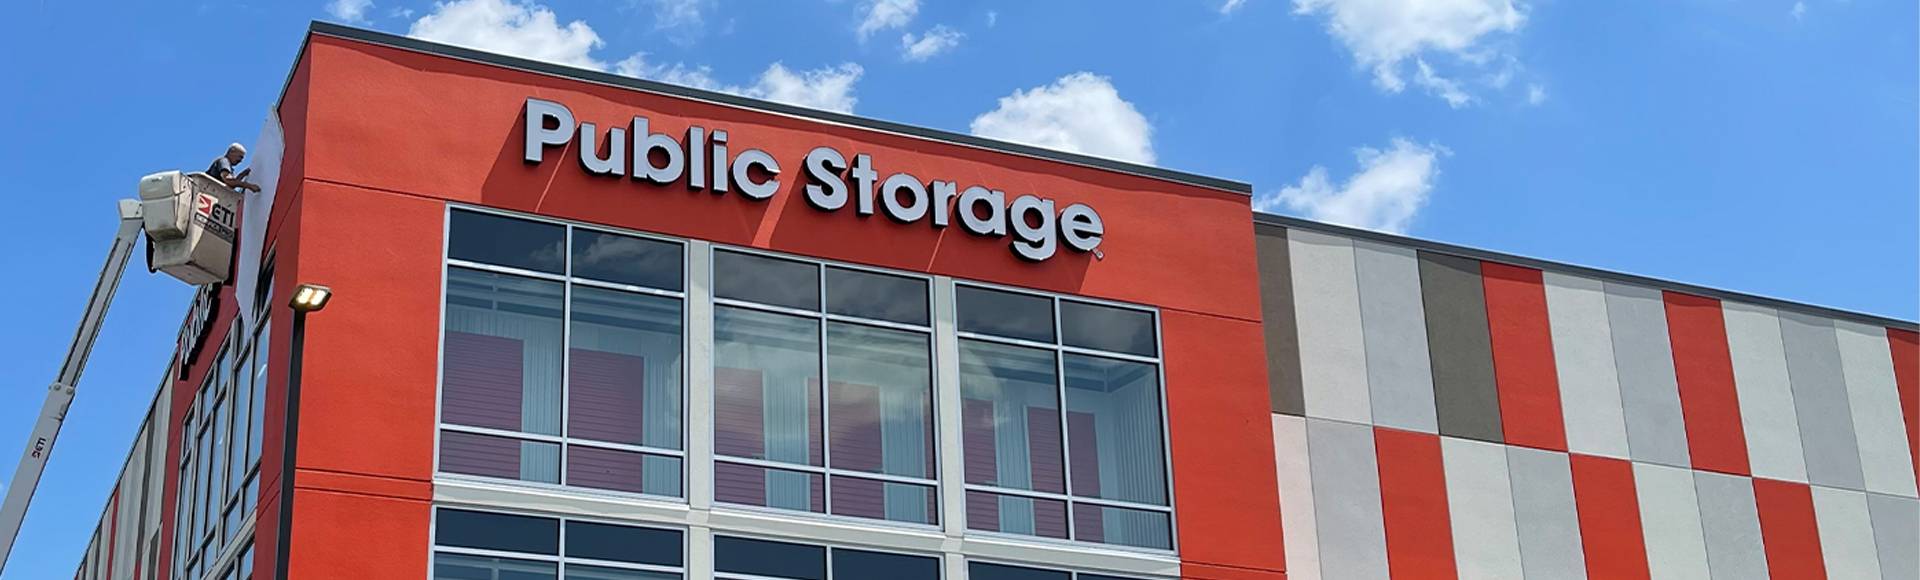 Leading Provider of Storage Facilities Signage for NJ, Eastern PA and NYC Businesses